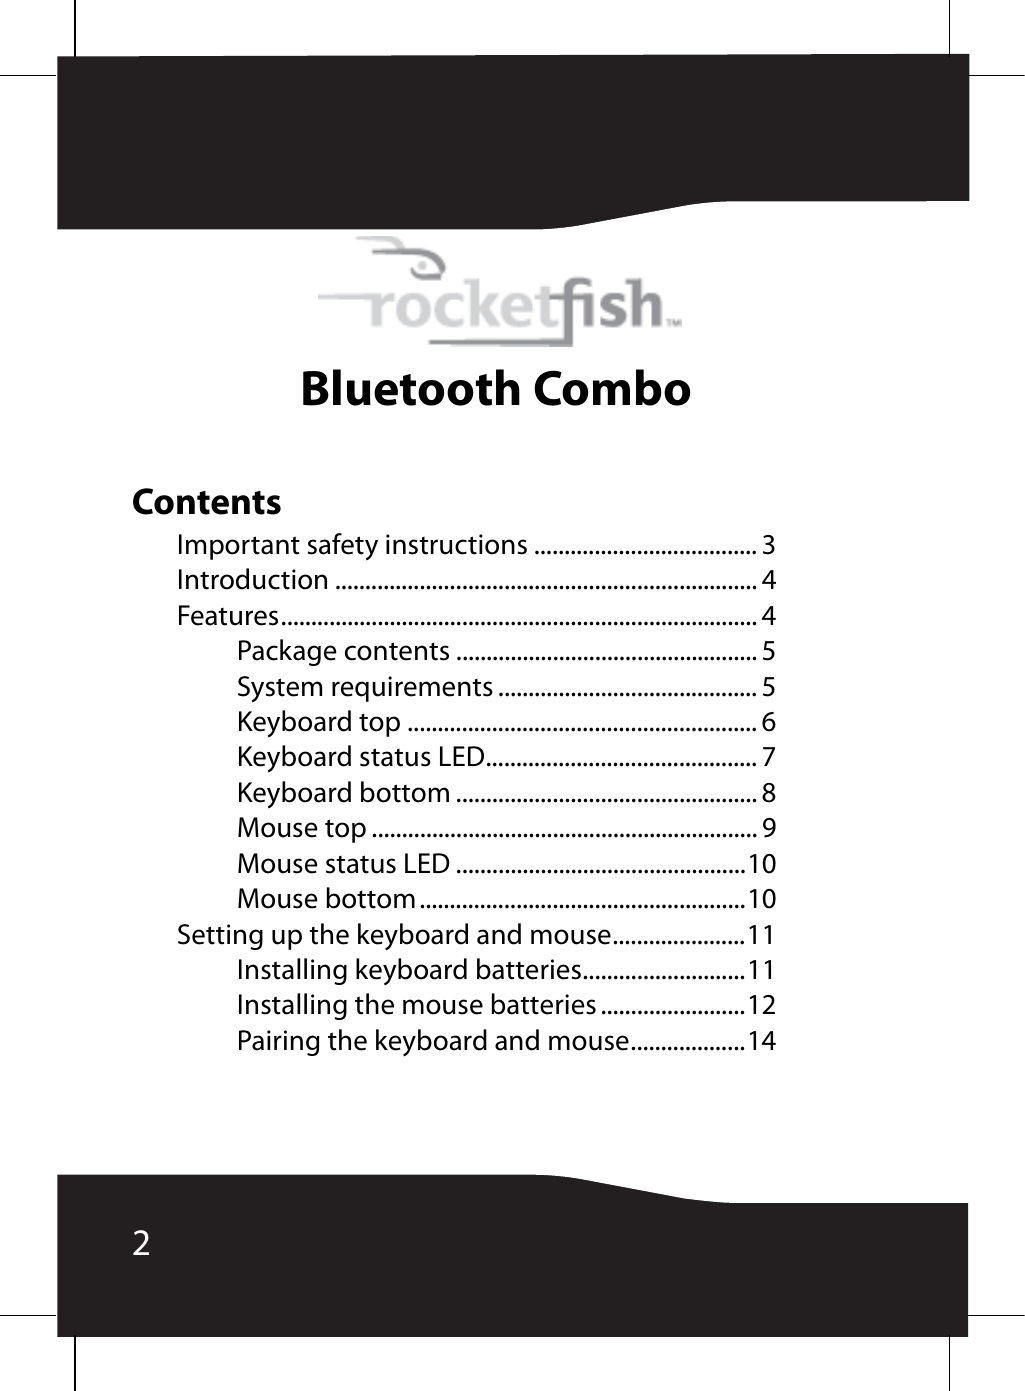 2Bluetooth ComboContentsImportant safety instructions ..................................... 3Introduction ...................................................................... 4Features............................................................................... 4Package contents .................................................. 5System requirements ........................................... 5Keyboard top .......................................................... 6Keyboard status LED............................................. 7Keyboard bottom .................................................. 8Mouse top ................................................................ 9Mouse status LED ................................................10Mouse bottom......................................................10Setting up the keyboard and mouse......................11Installing keyboard batteries...........................11Installing the mouse batteries ........................12Pairing the keyboard and mouse...................14